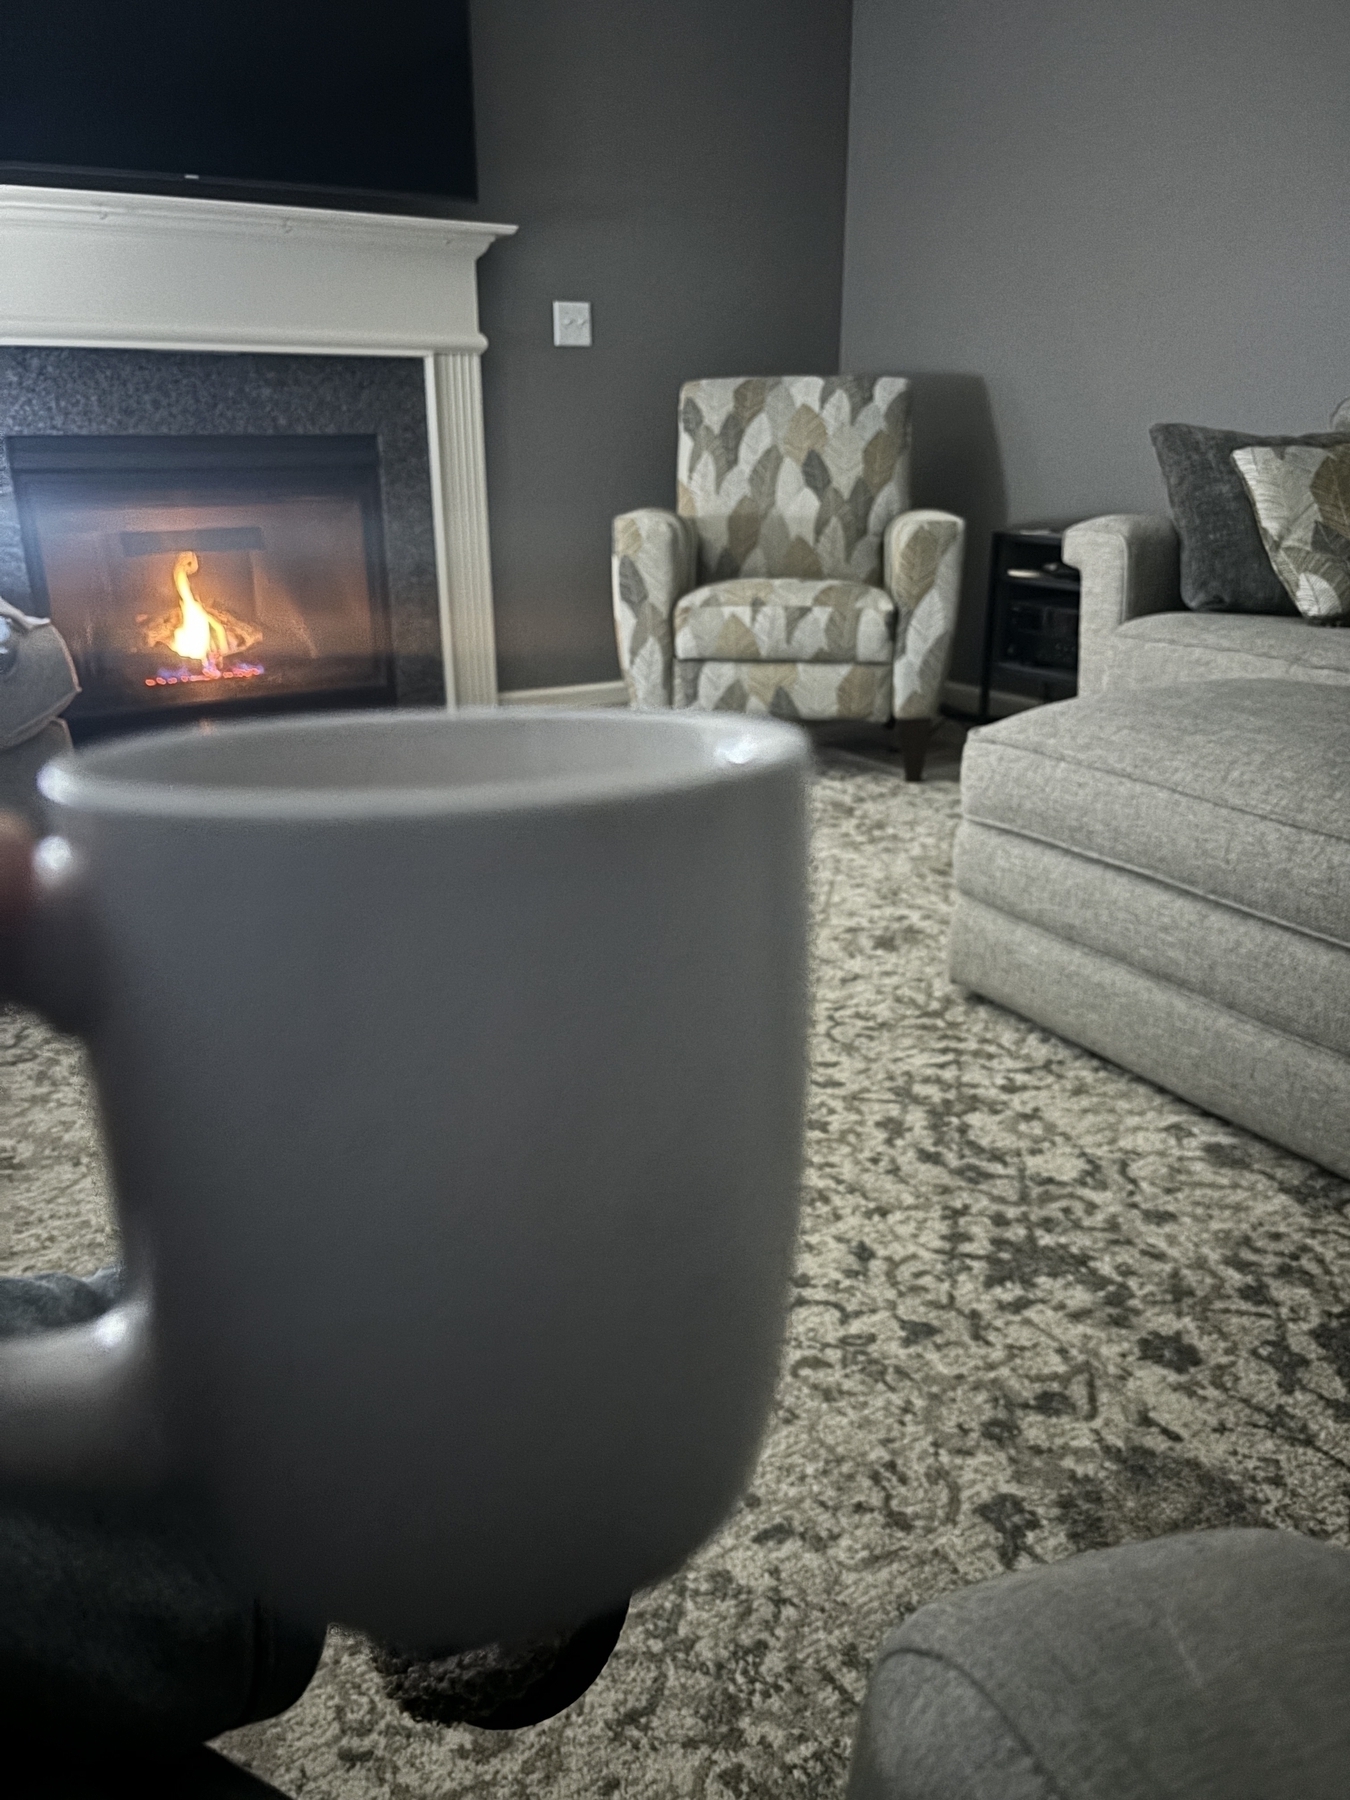 White coffee mug in front of an inviting fire